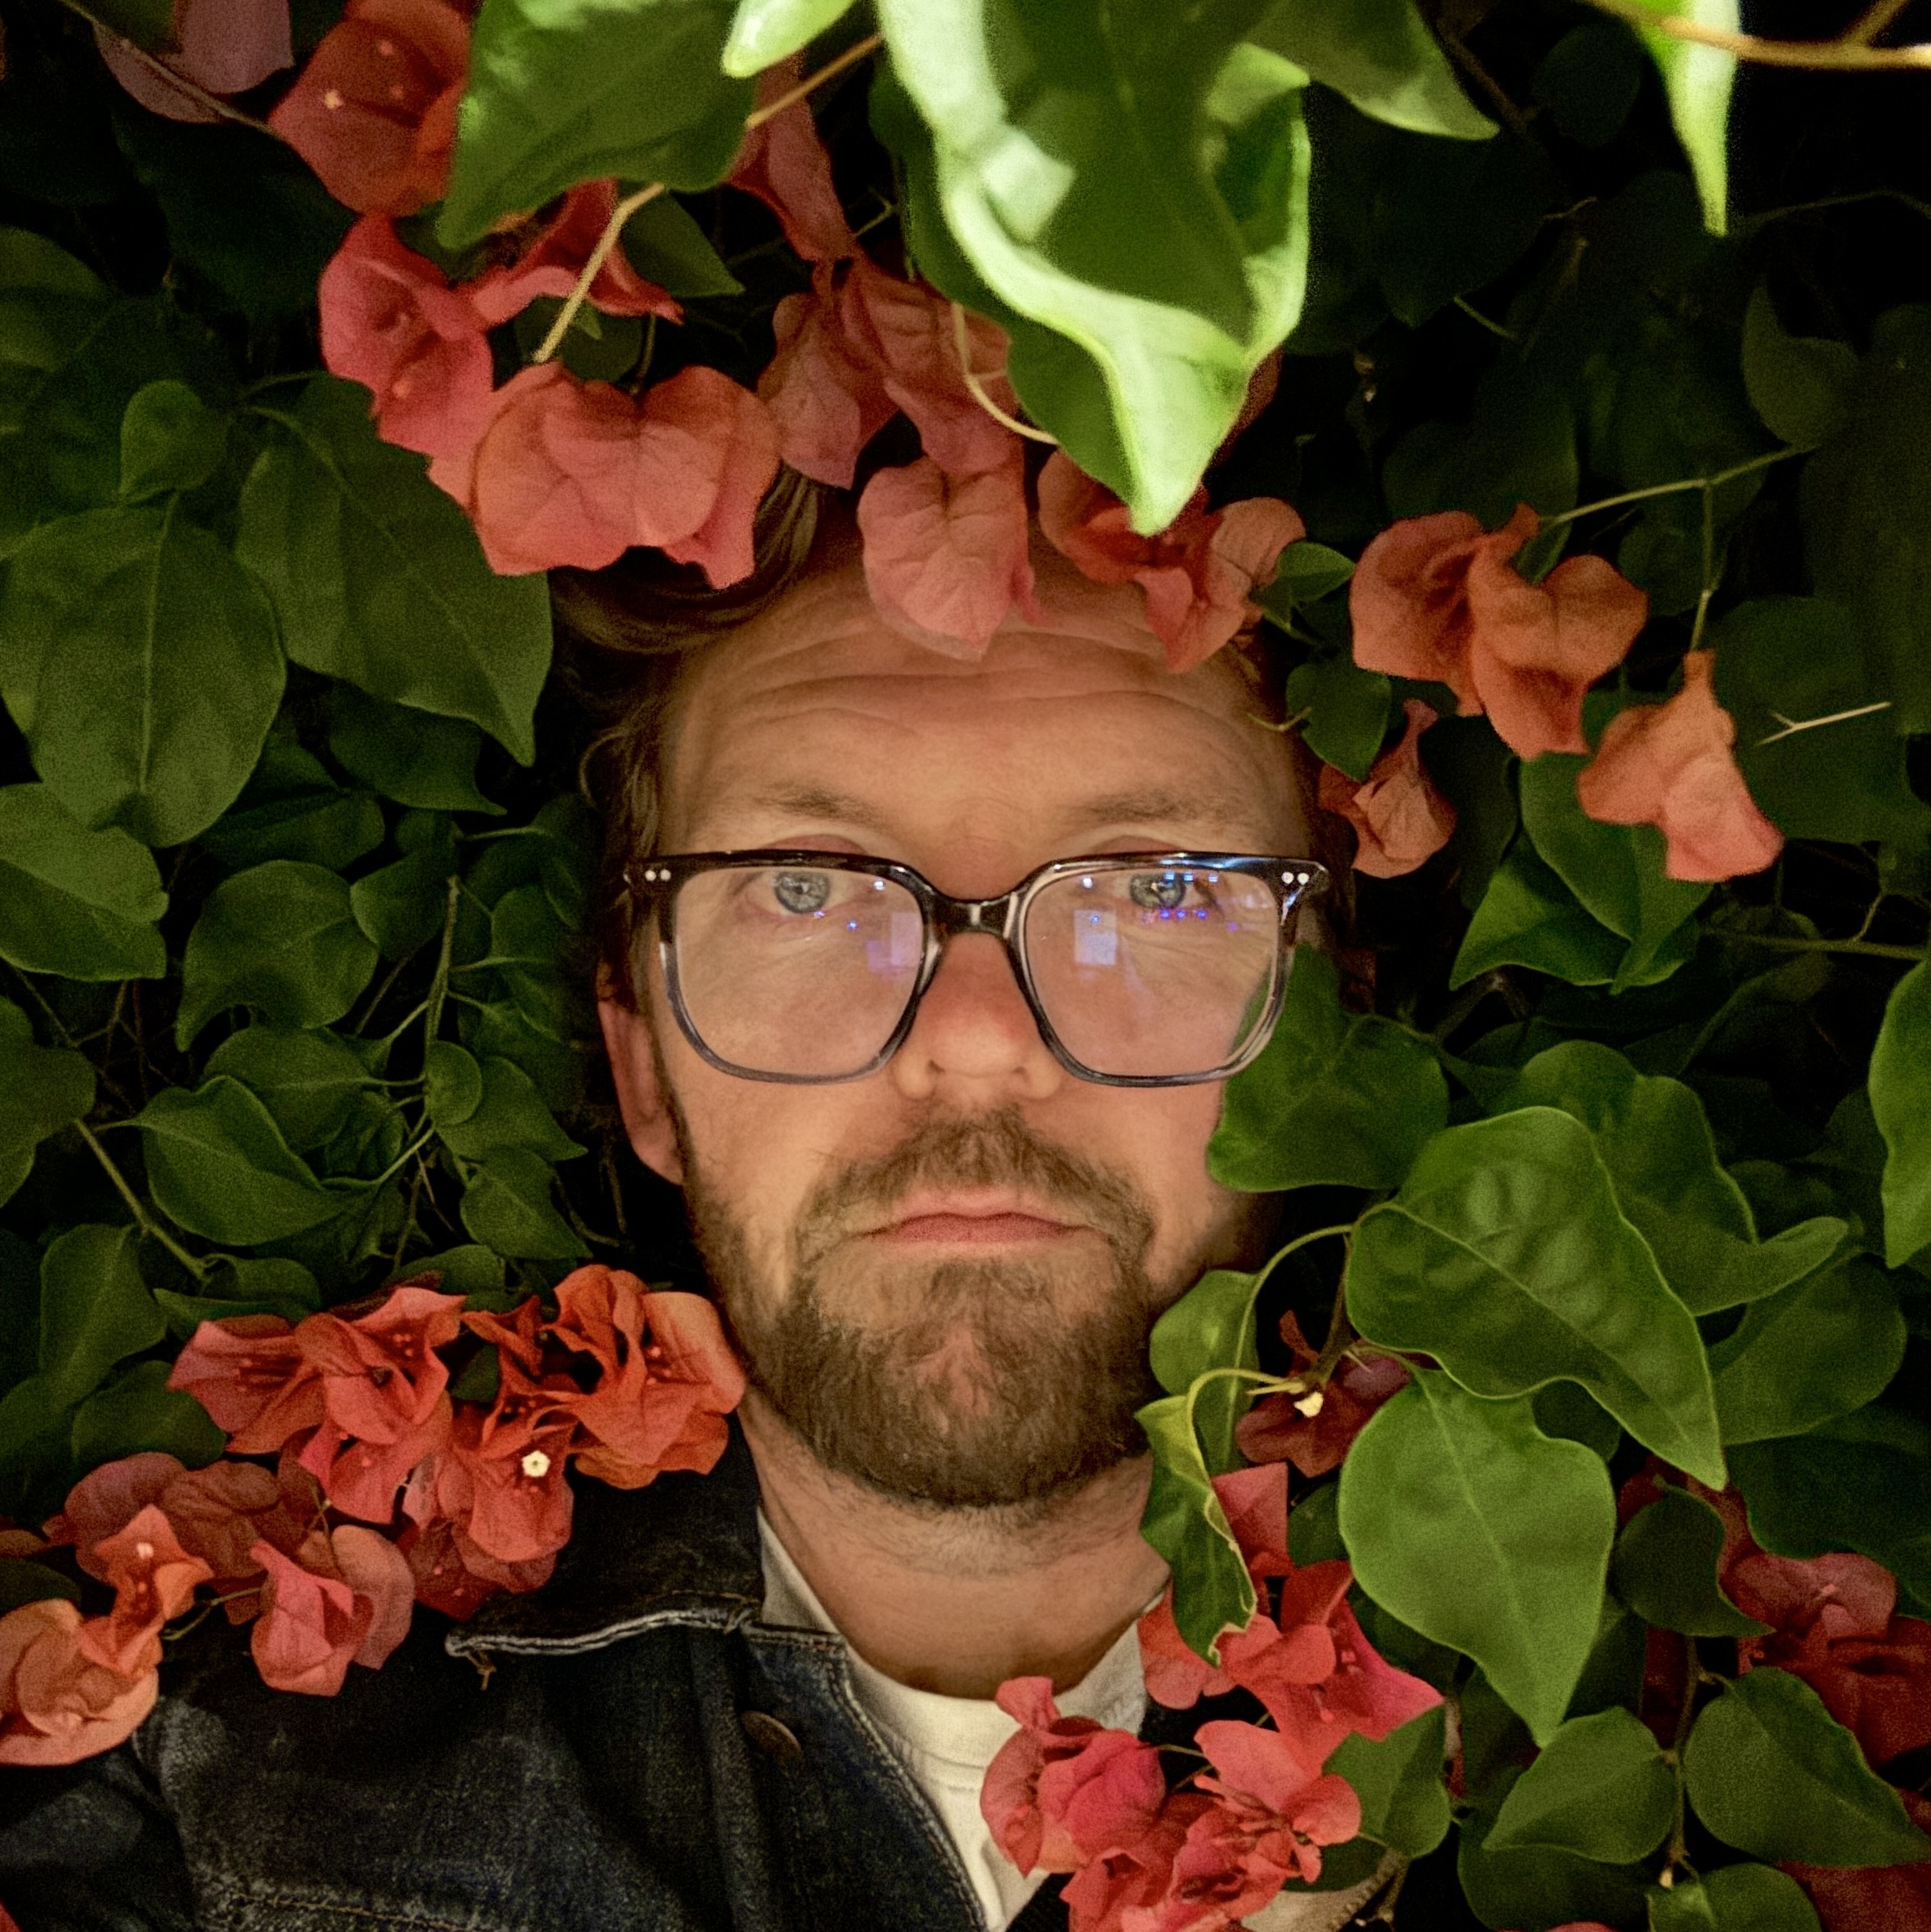 White man with glasses hiddent slightly behind a green bush and some pink flowers